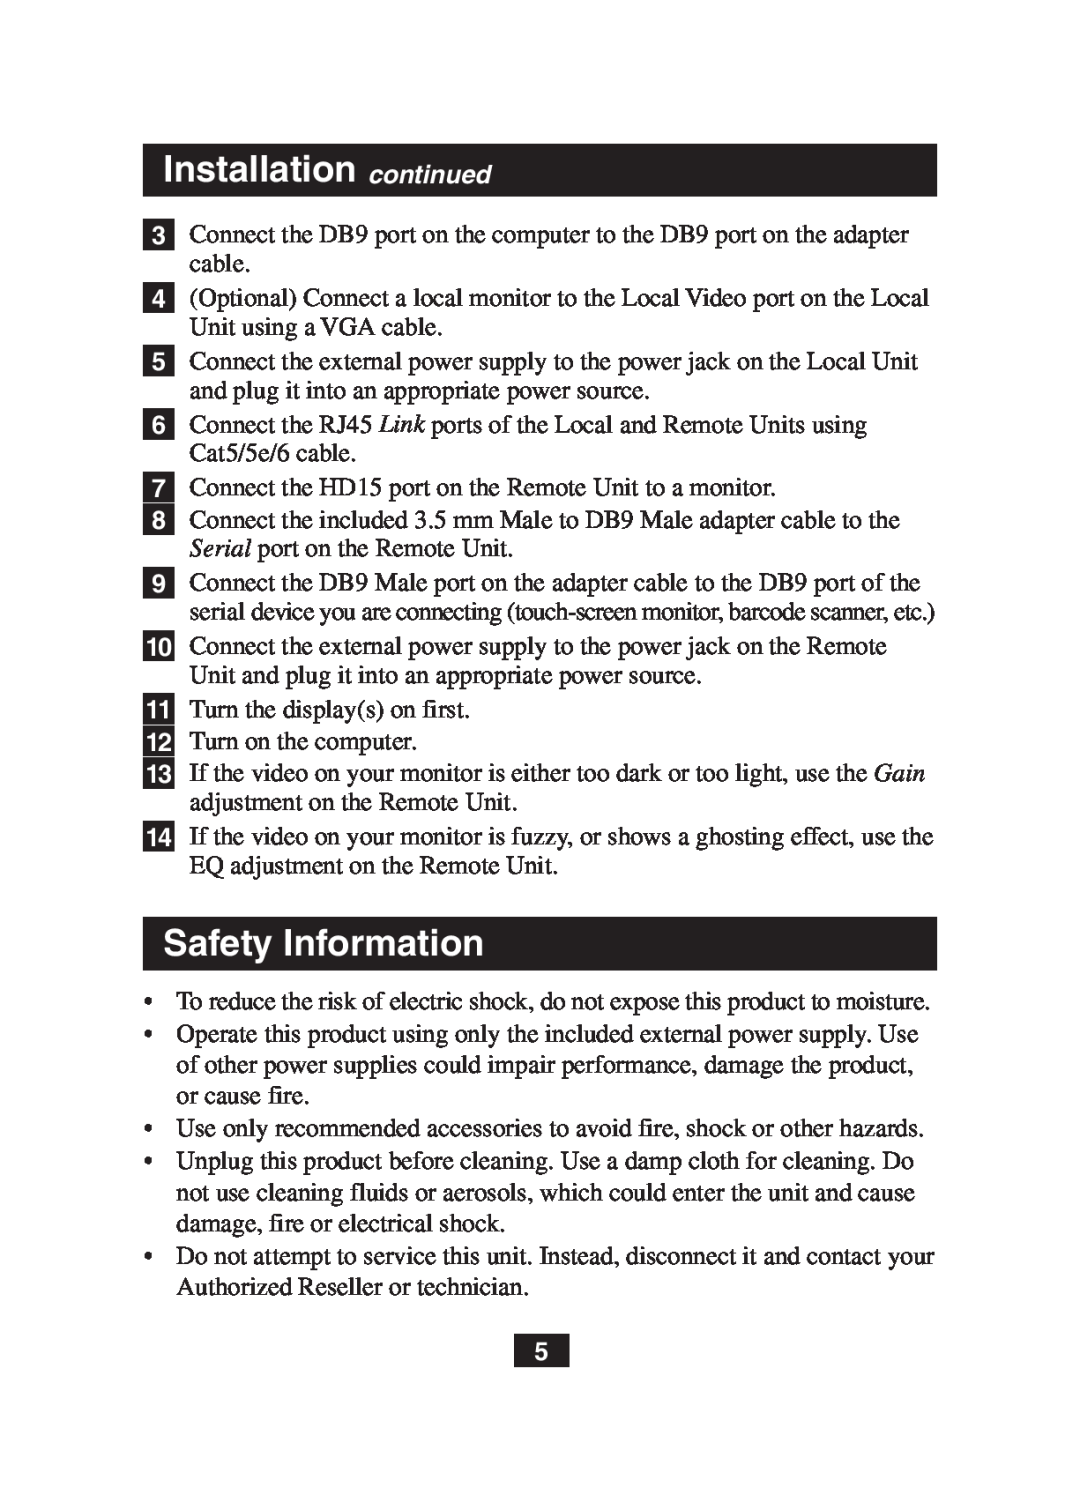 Tripp Lite B130-101S owner manual Installation continued, Safety Information 